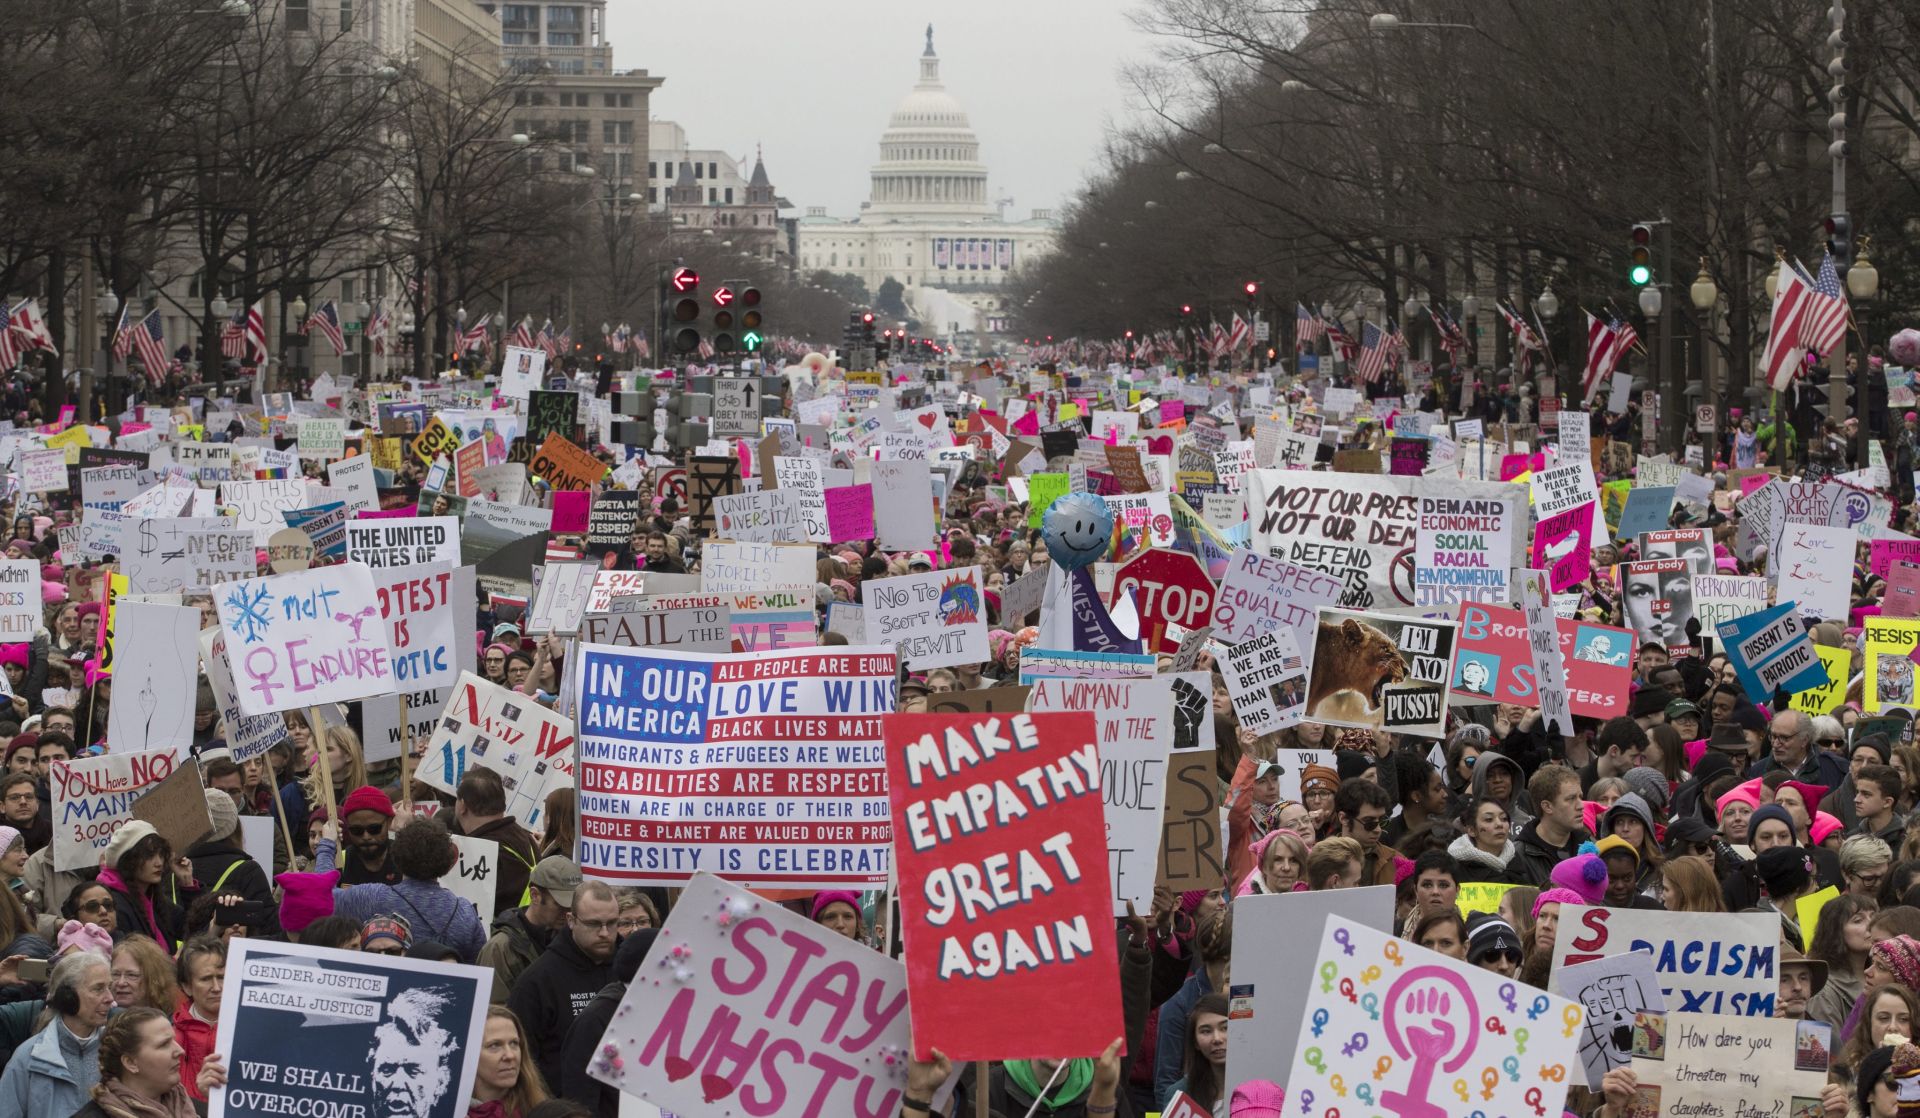 epa05740105 Thousands of people on Pennsylvania Avenue participate in the Women's March and rally to protest President Donald J. Trump the day after he was sworn in as the 45th President of the United States, in Washington, DC, USA, 21 January 2017. Protest rallies were held in over 30 countries around the world in solidarity with the Women's March on Washington in defense of press freedom, women's and human rights following the official inauguration on 20 January of Donald J. Trump as the 45th President of the United States of America in Washington, USA.  EPA/MICHAEL REYNOLDS